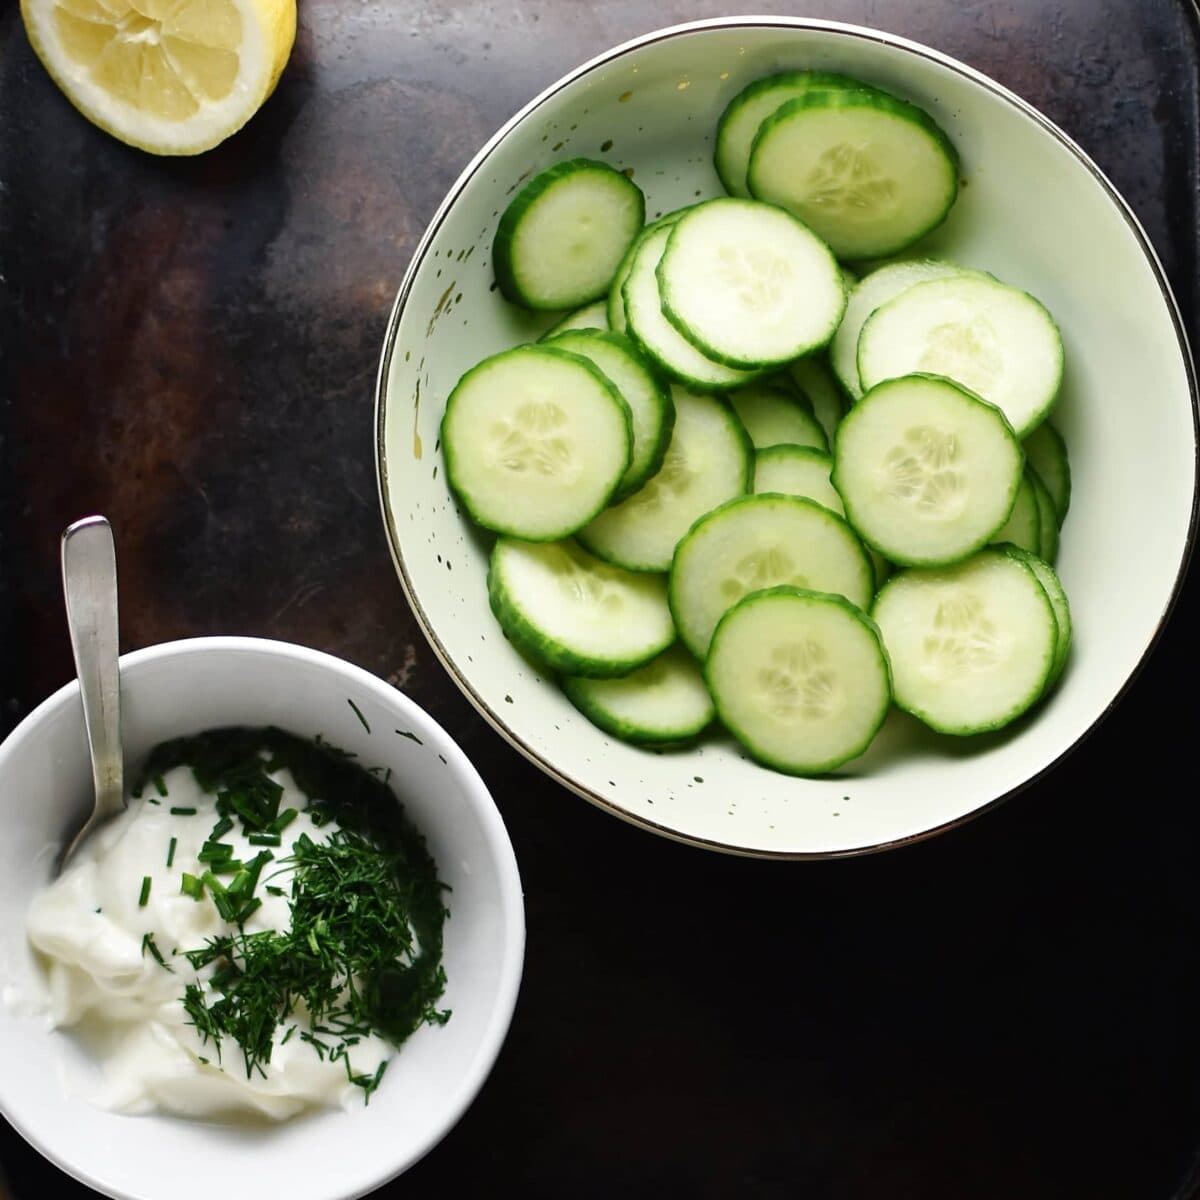 Top down view of creamy sauce in white bowl and cucumber slices in light green bowl.